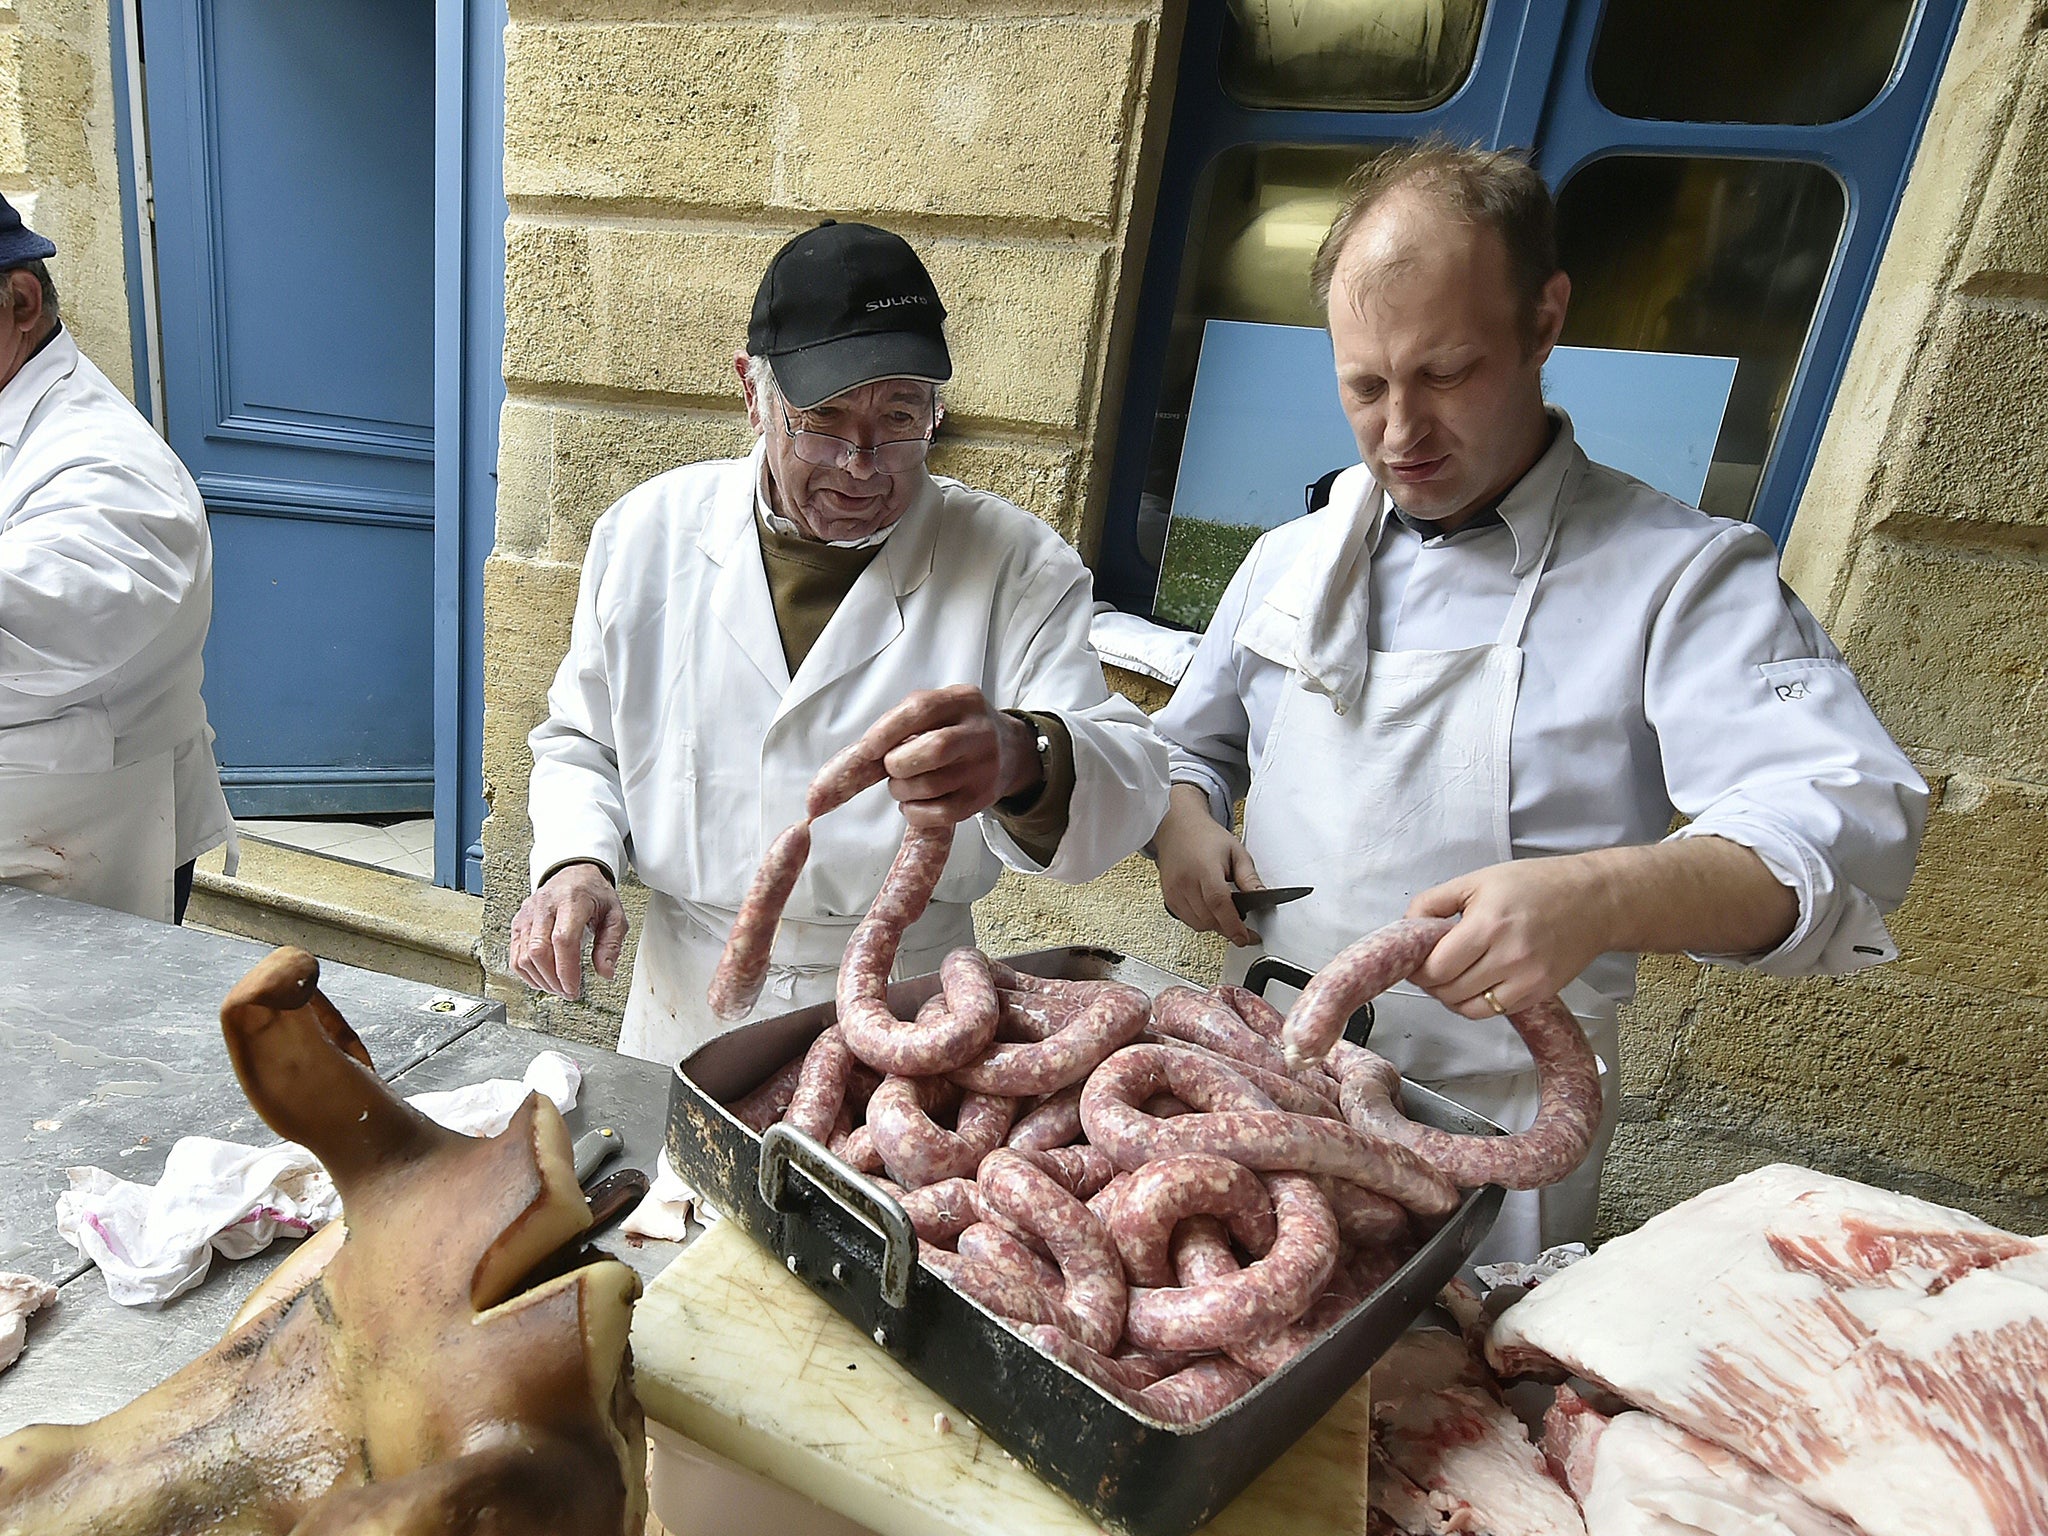 Butchers and cooks prepare pork sausages in the city centre of Bordeaux during the "tue cochon" (pig killing) event, based on an ancestral peasant tradition marking the end of winter